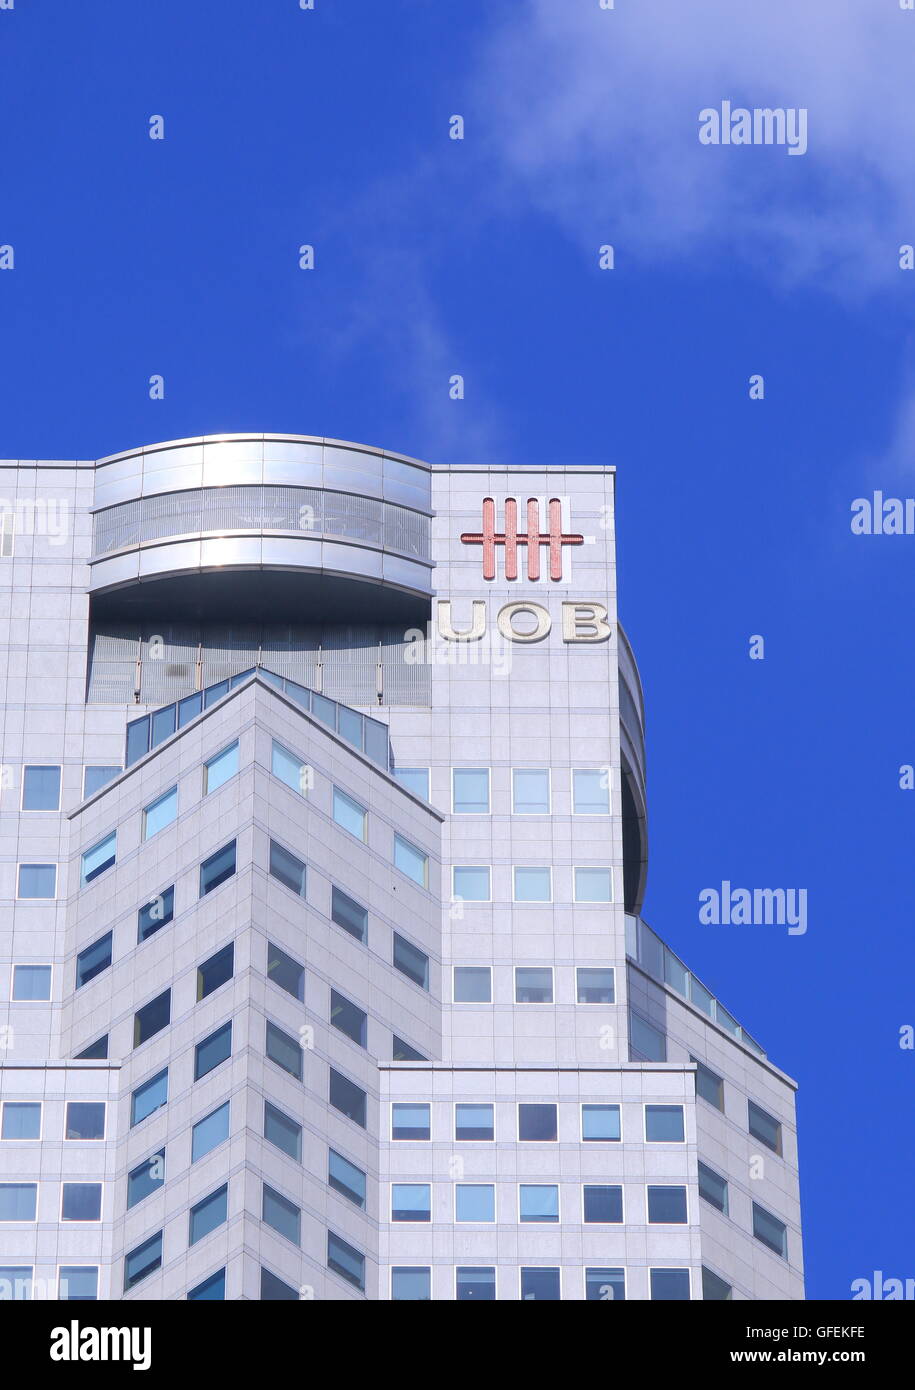 UOB United Overseas Bank a major banking organisation headquartered in Singapore founded in 1935. Stock Photo